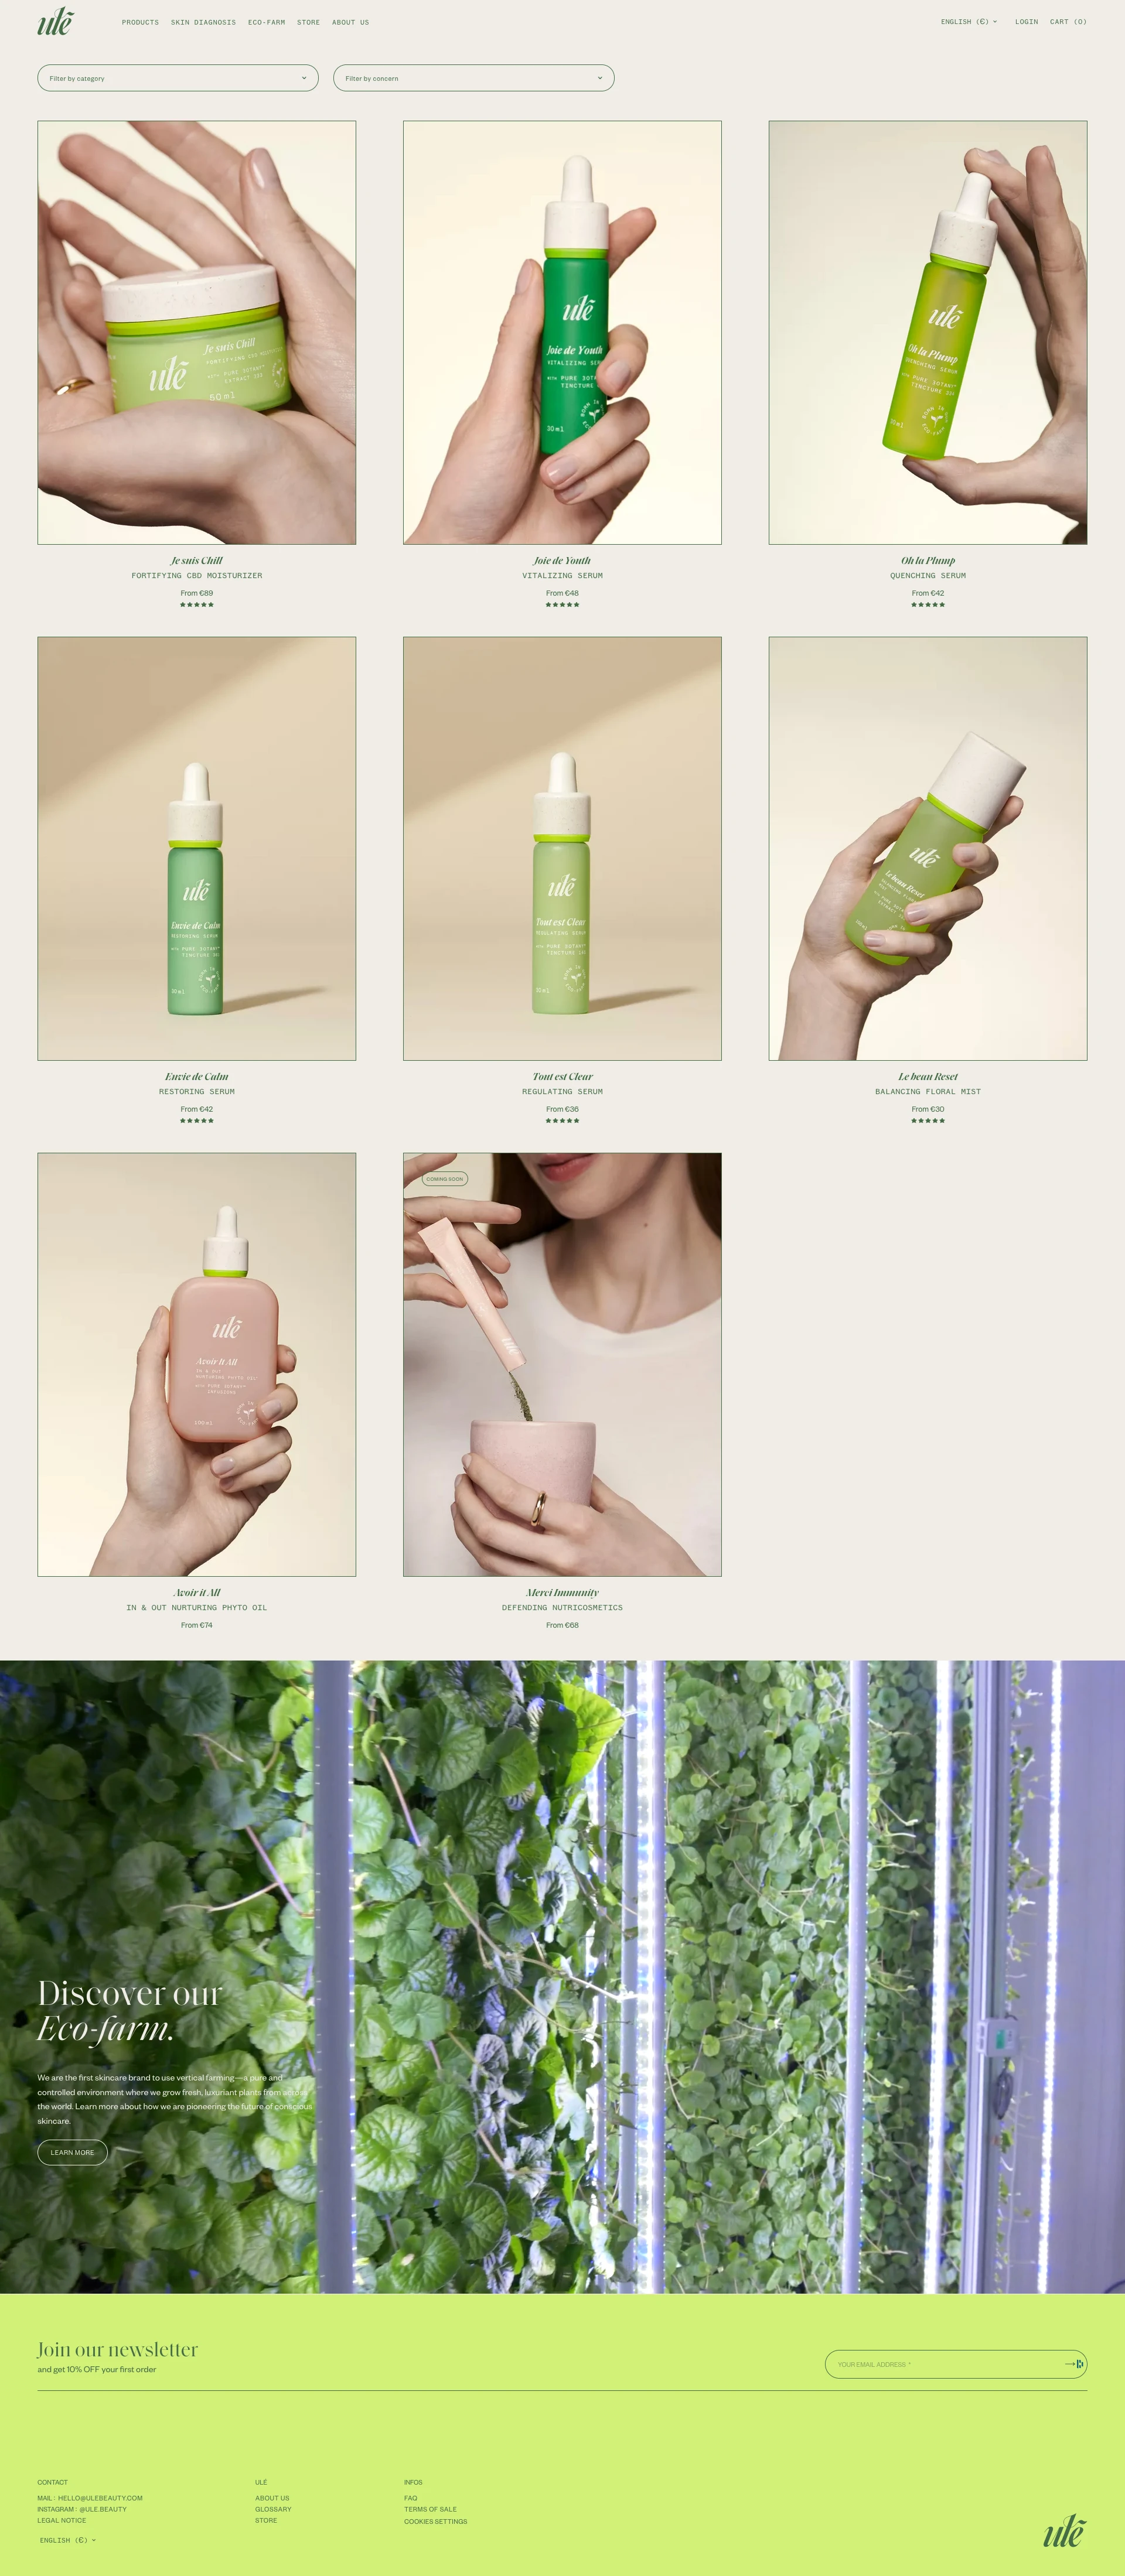 Ulé Landing Page Example: Ulé reinvents cosmetic care, using for the first time an avant-garde cultivation method to serve your skin. Cultivated in its vertical farm, plants bursting with molecules and nutrients are transformed into super-active extracts, to give you radiant skin.